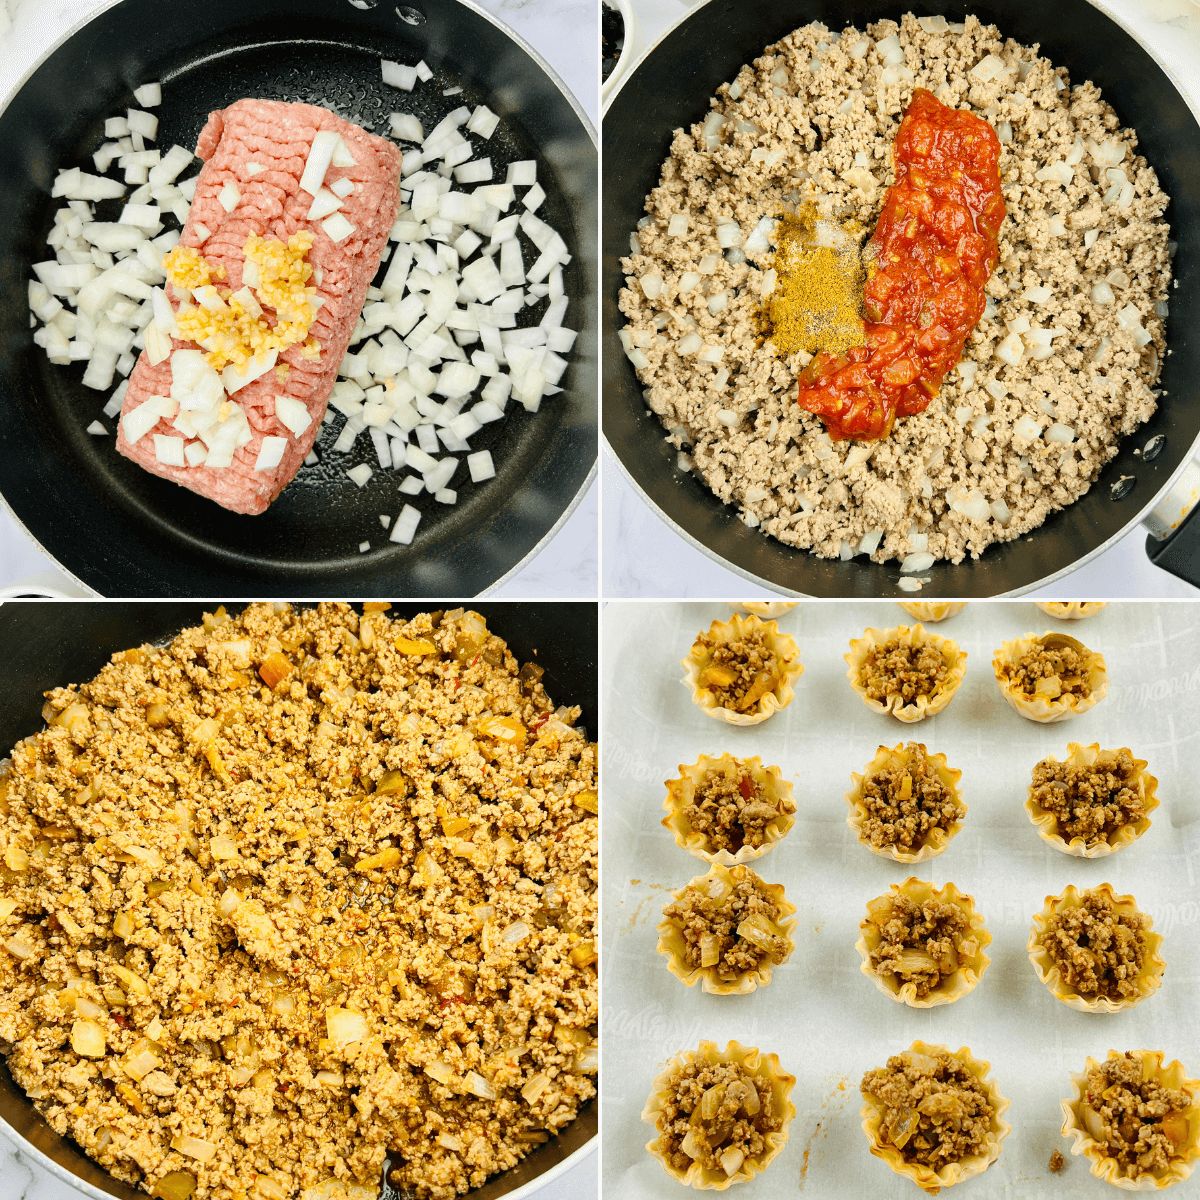 A series of photos showing the process of making the ground beef filling.